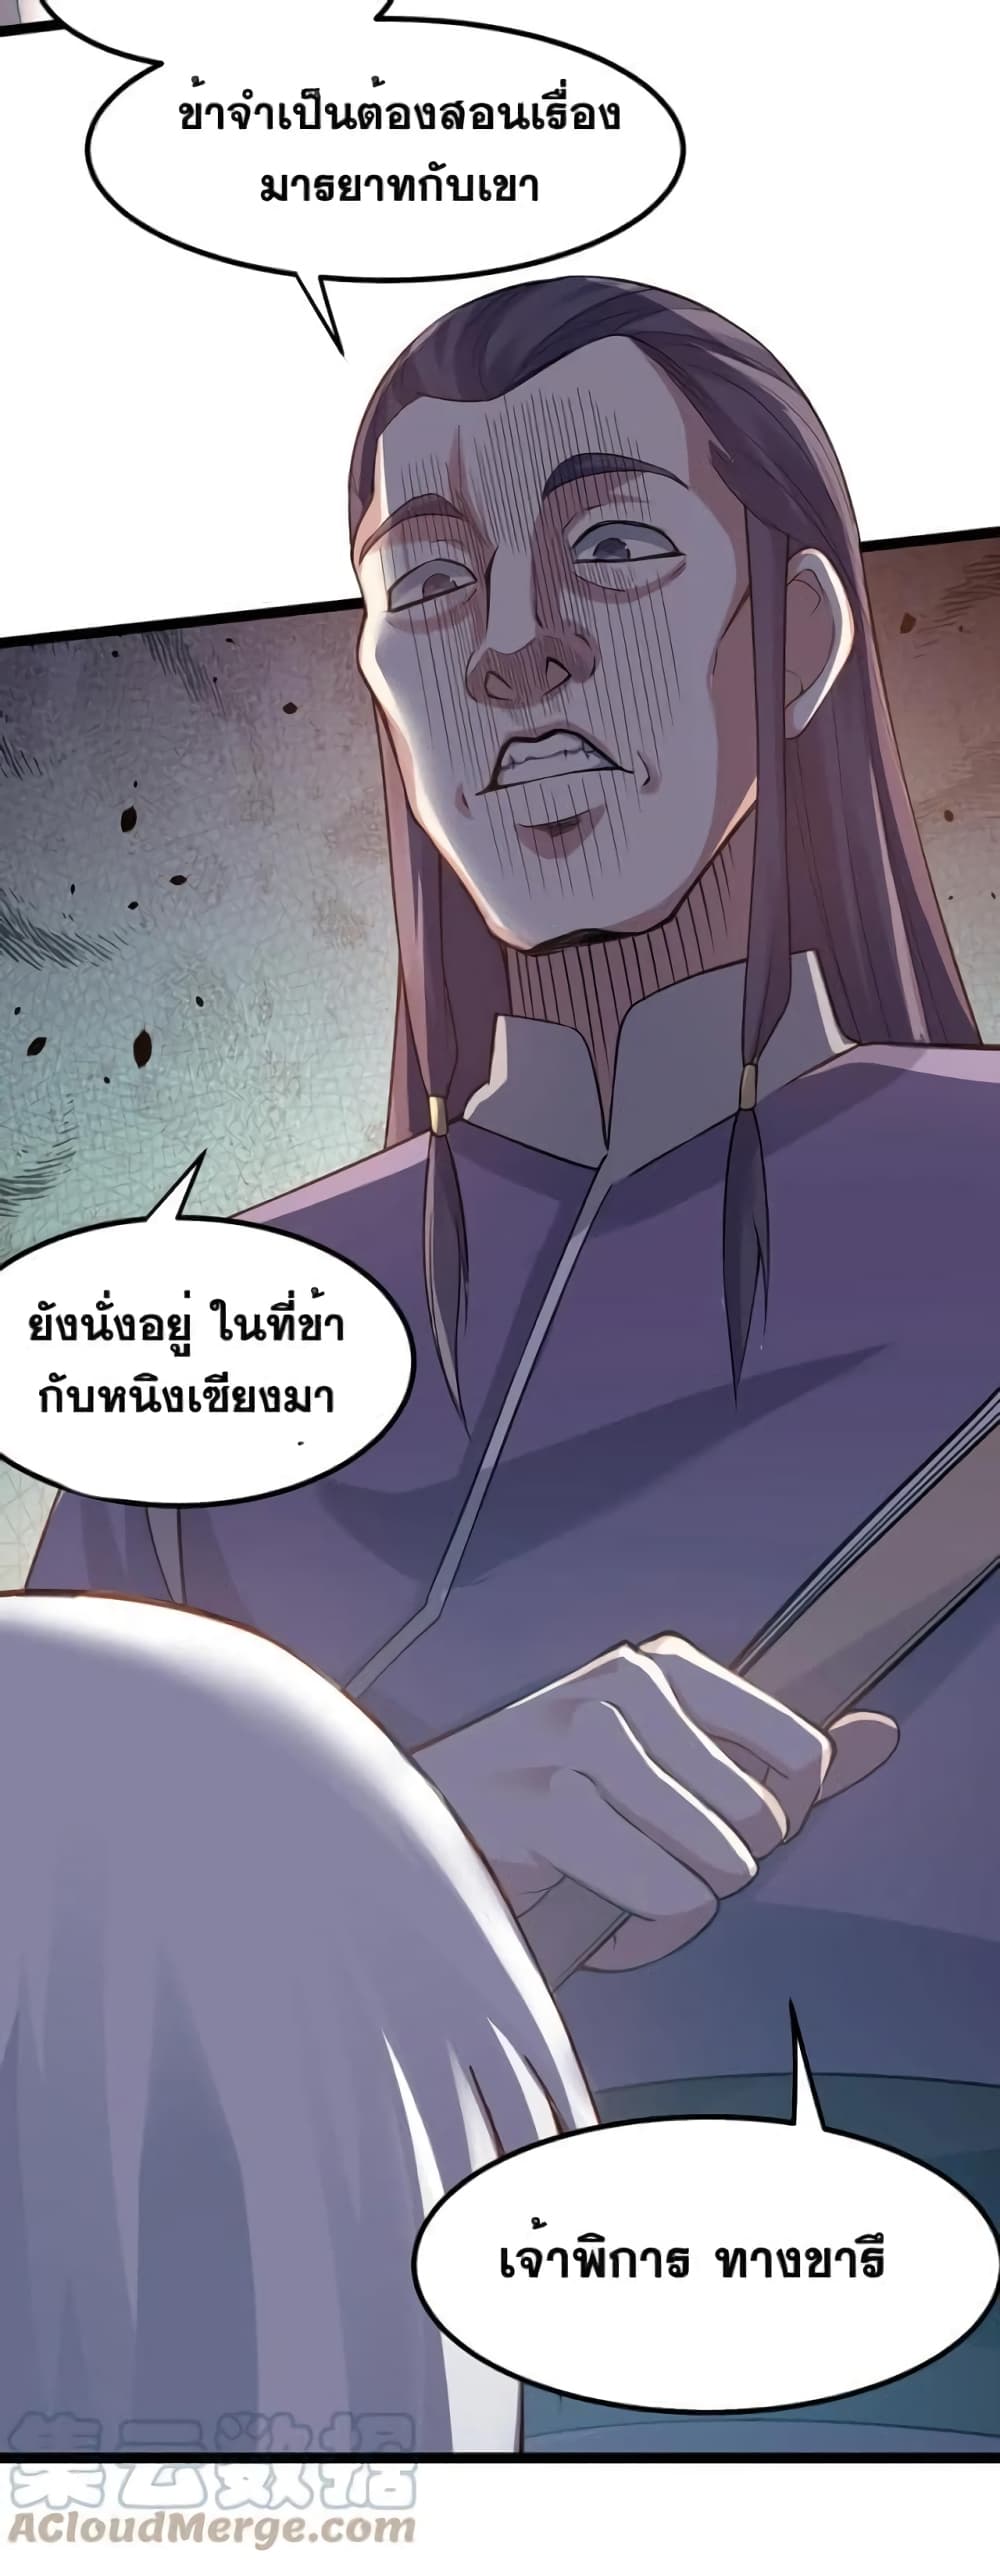 Godsian Masian from Another World ตอนที่ 103 (12)